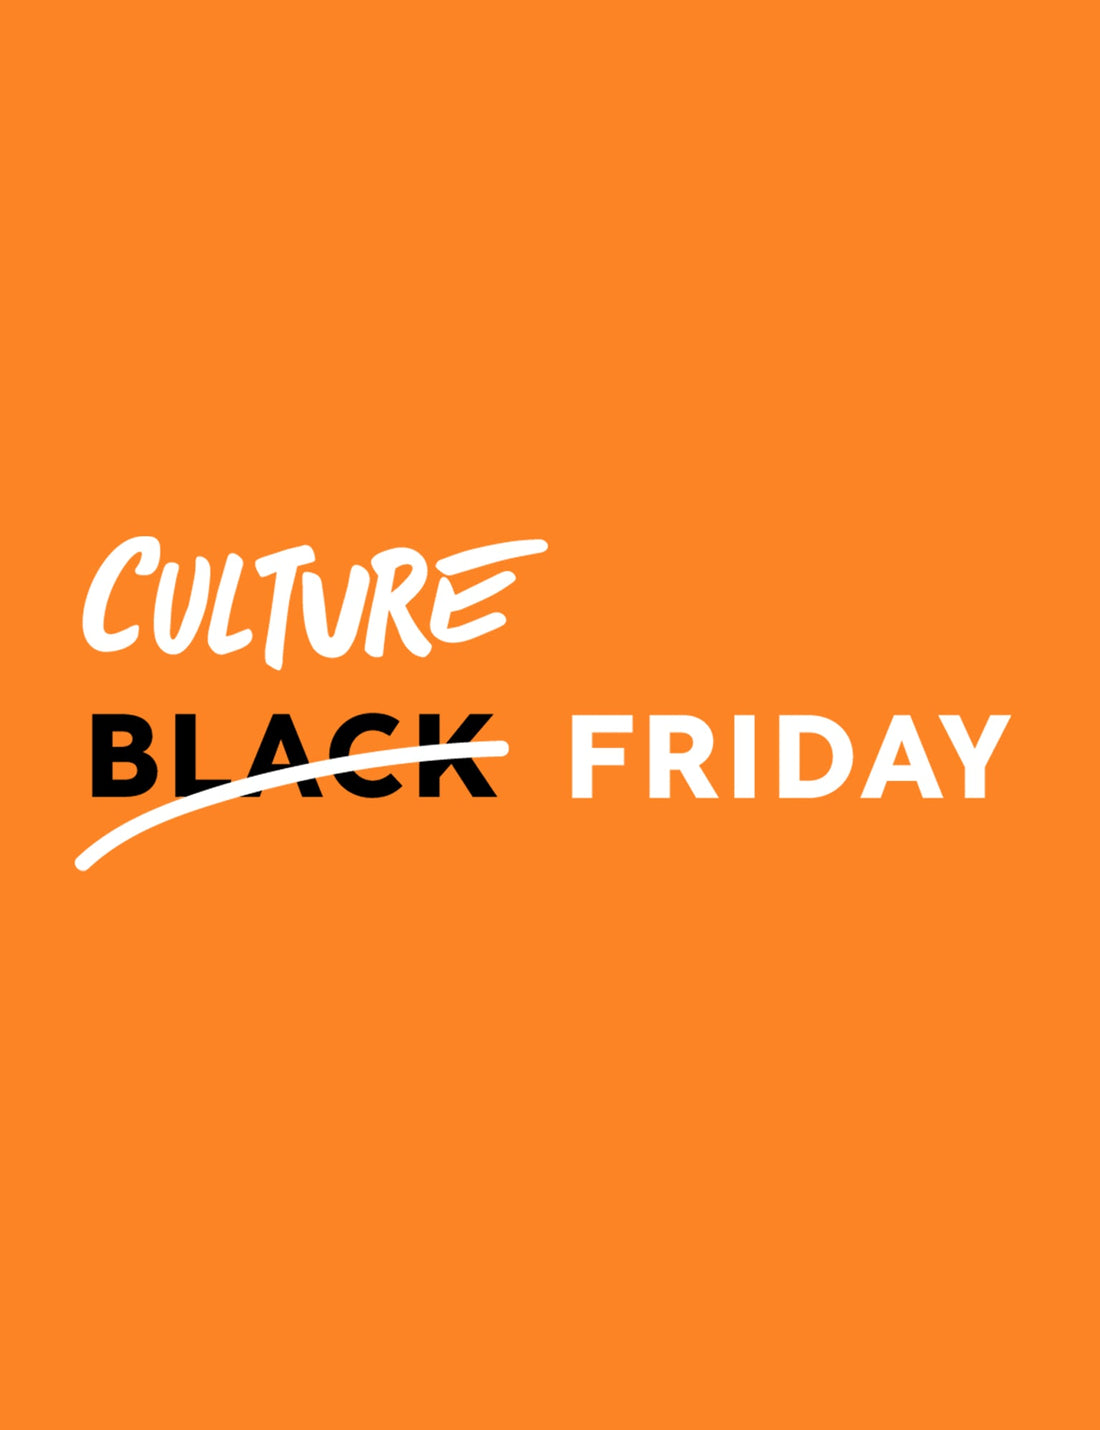 Mads Nørgaard renames Black Friday to Culture Friday